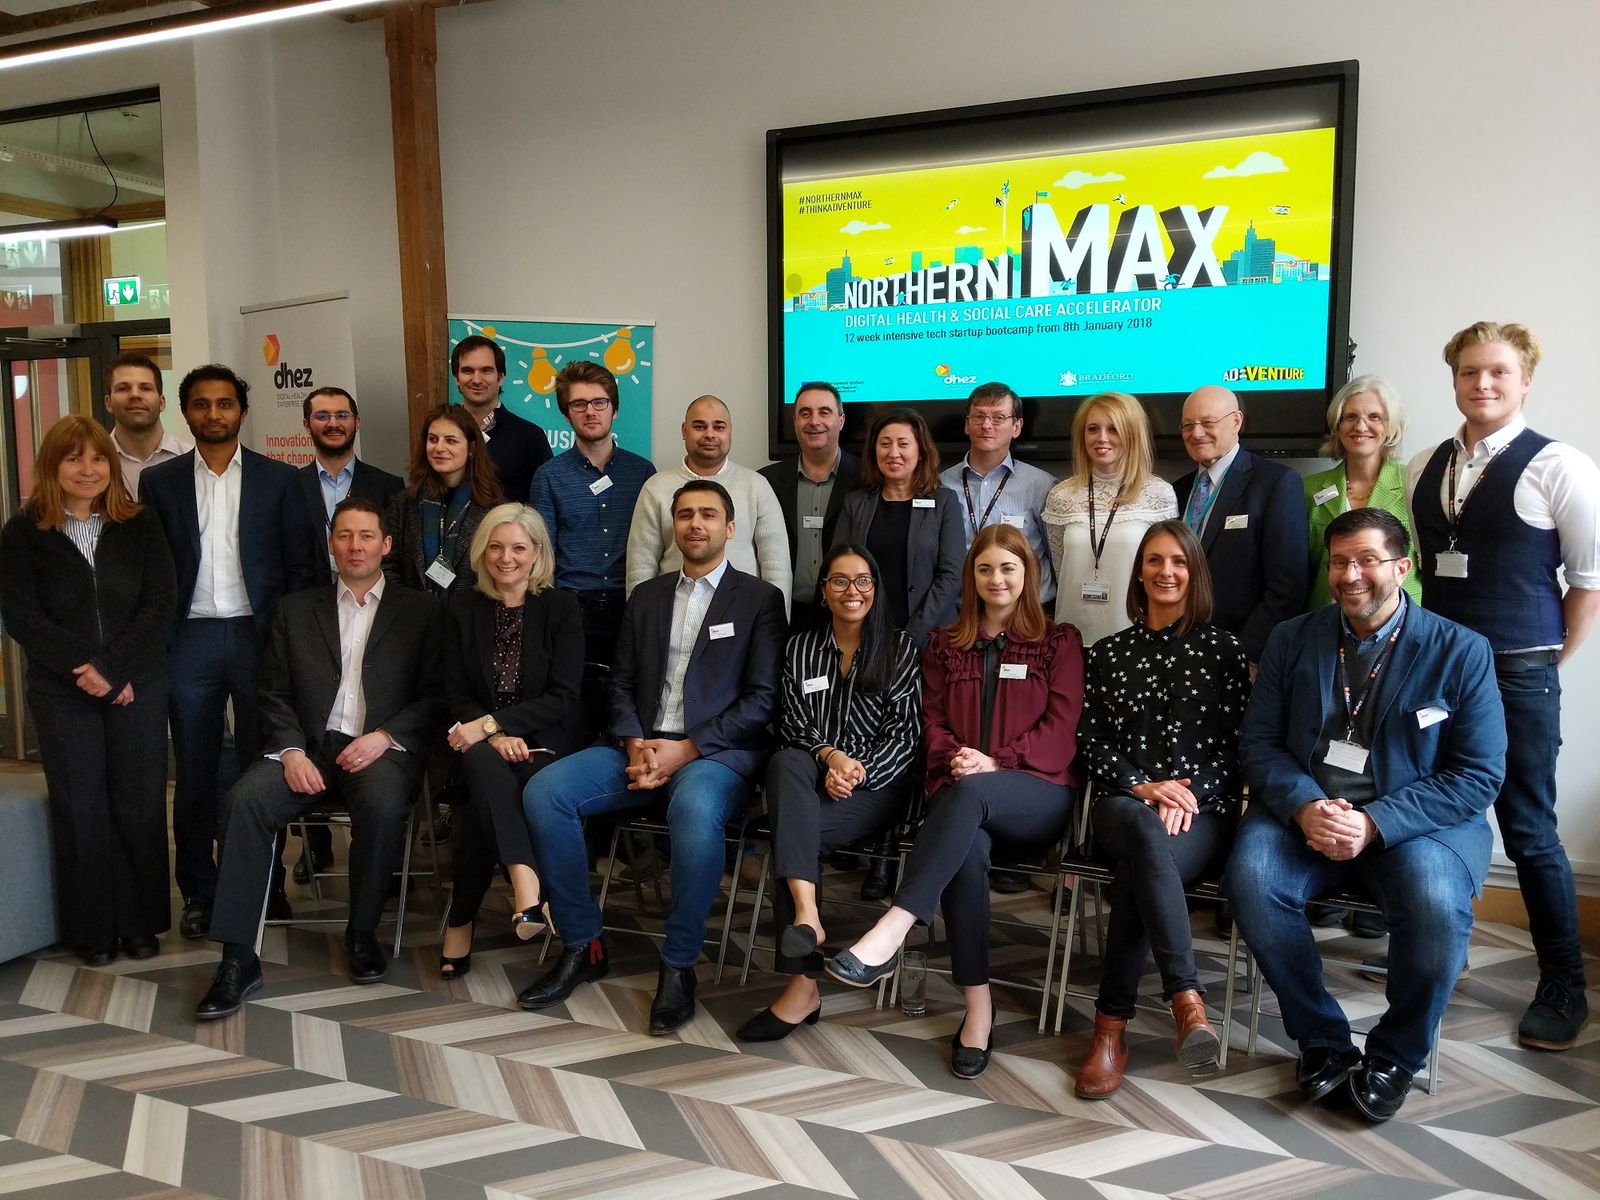 Bradford businesses invited to join Northern Max programme